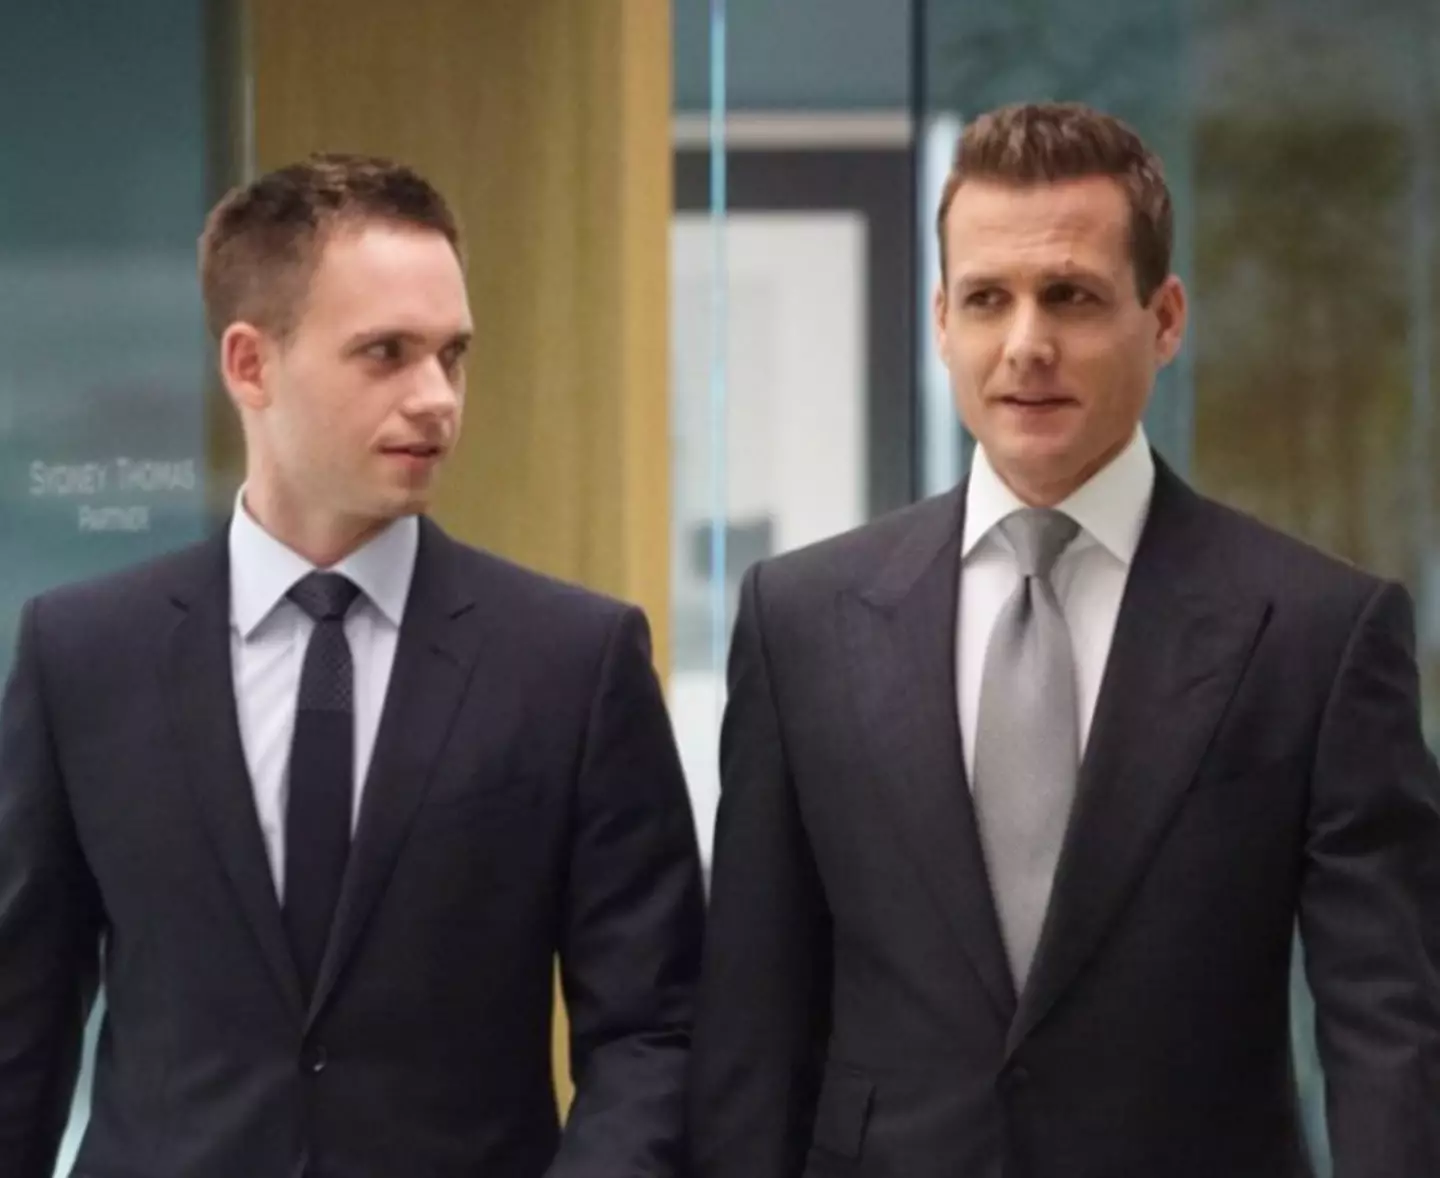 Leads of the original series, Harvey Specter and Michael Ross were played by Gabriel Macht and Patrick J.Adams, respectively.